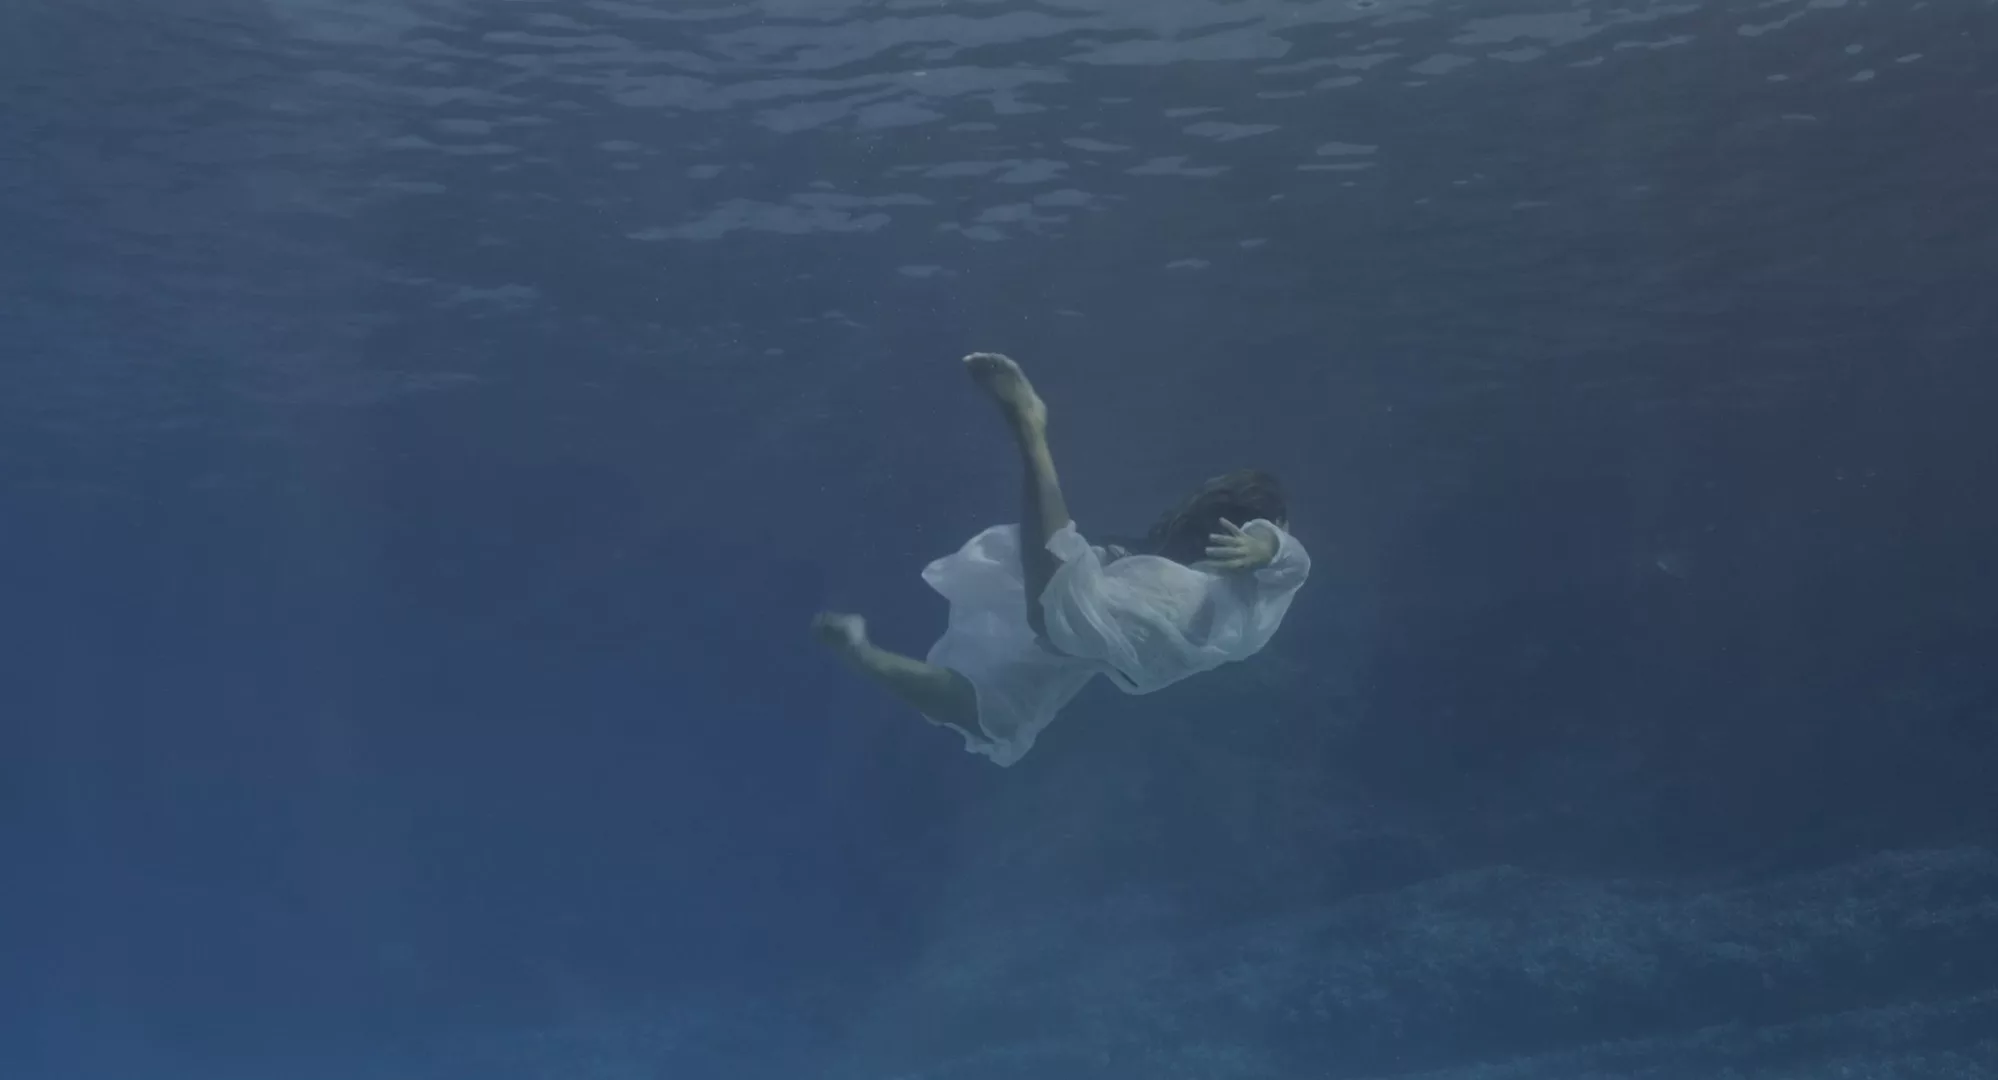 A person in a long white flowing dress is surrounded by blue water.